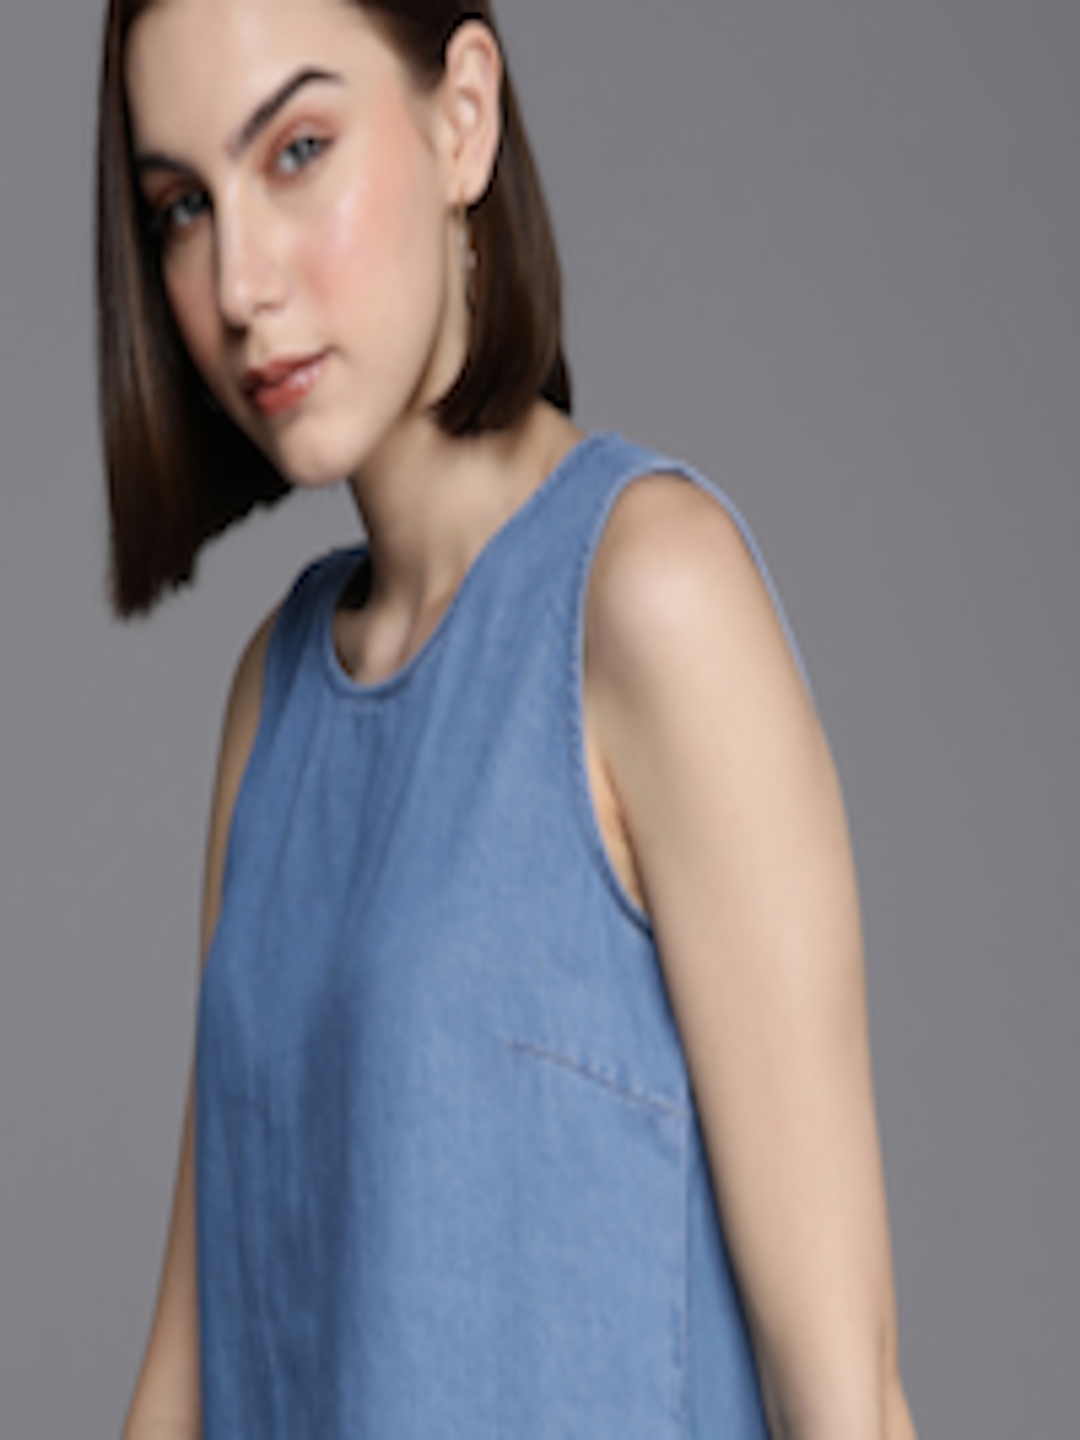 Buy NEXT Solid Sleeveless Chambray Top - Tops for Women 25003726 | Myntra